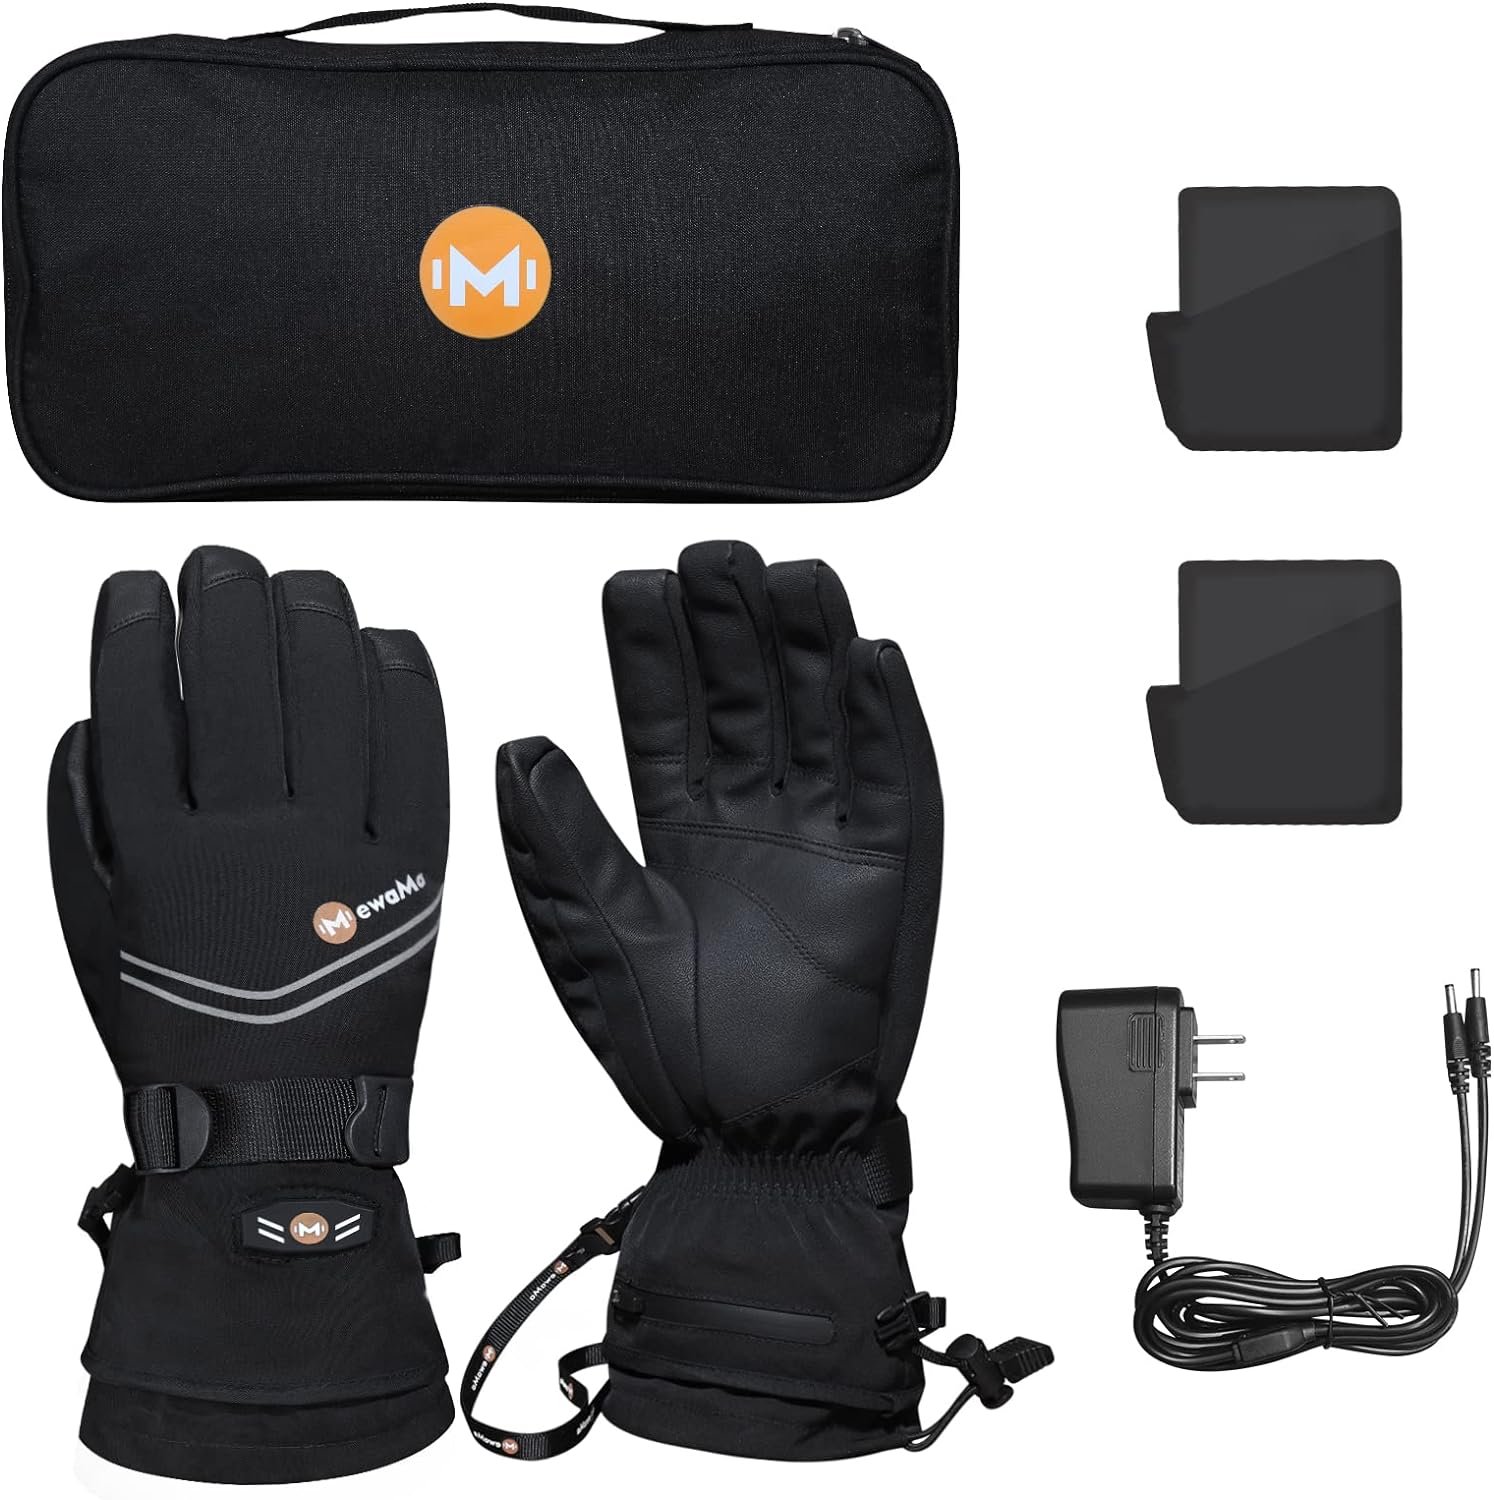 Heated Gloves for Men and Women, MewaMa Rechargeable Electric Heated Gloves, Waterproof Touchscreen Hand Warmer Gloves for Climbing, Hiking, Cycling, Winter Must Have Thermal Heated Gloves